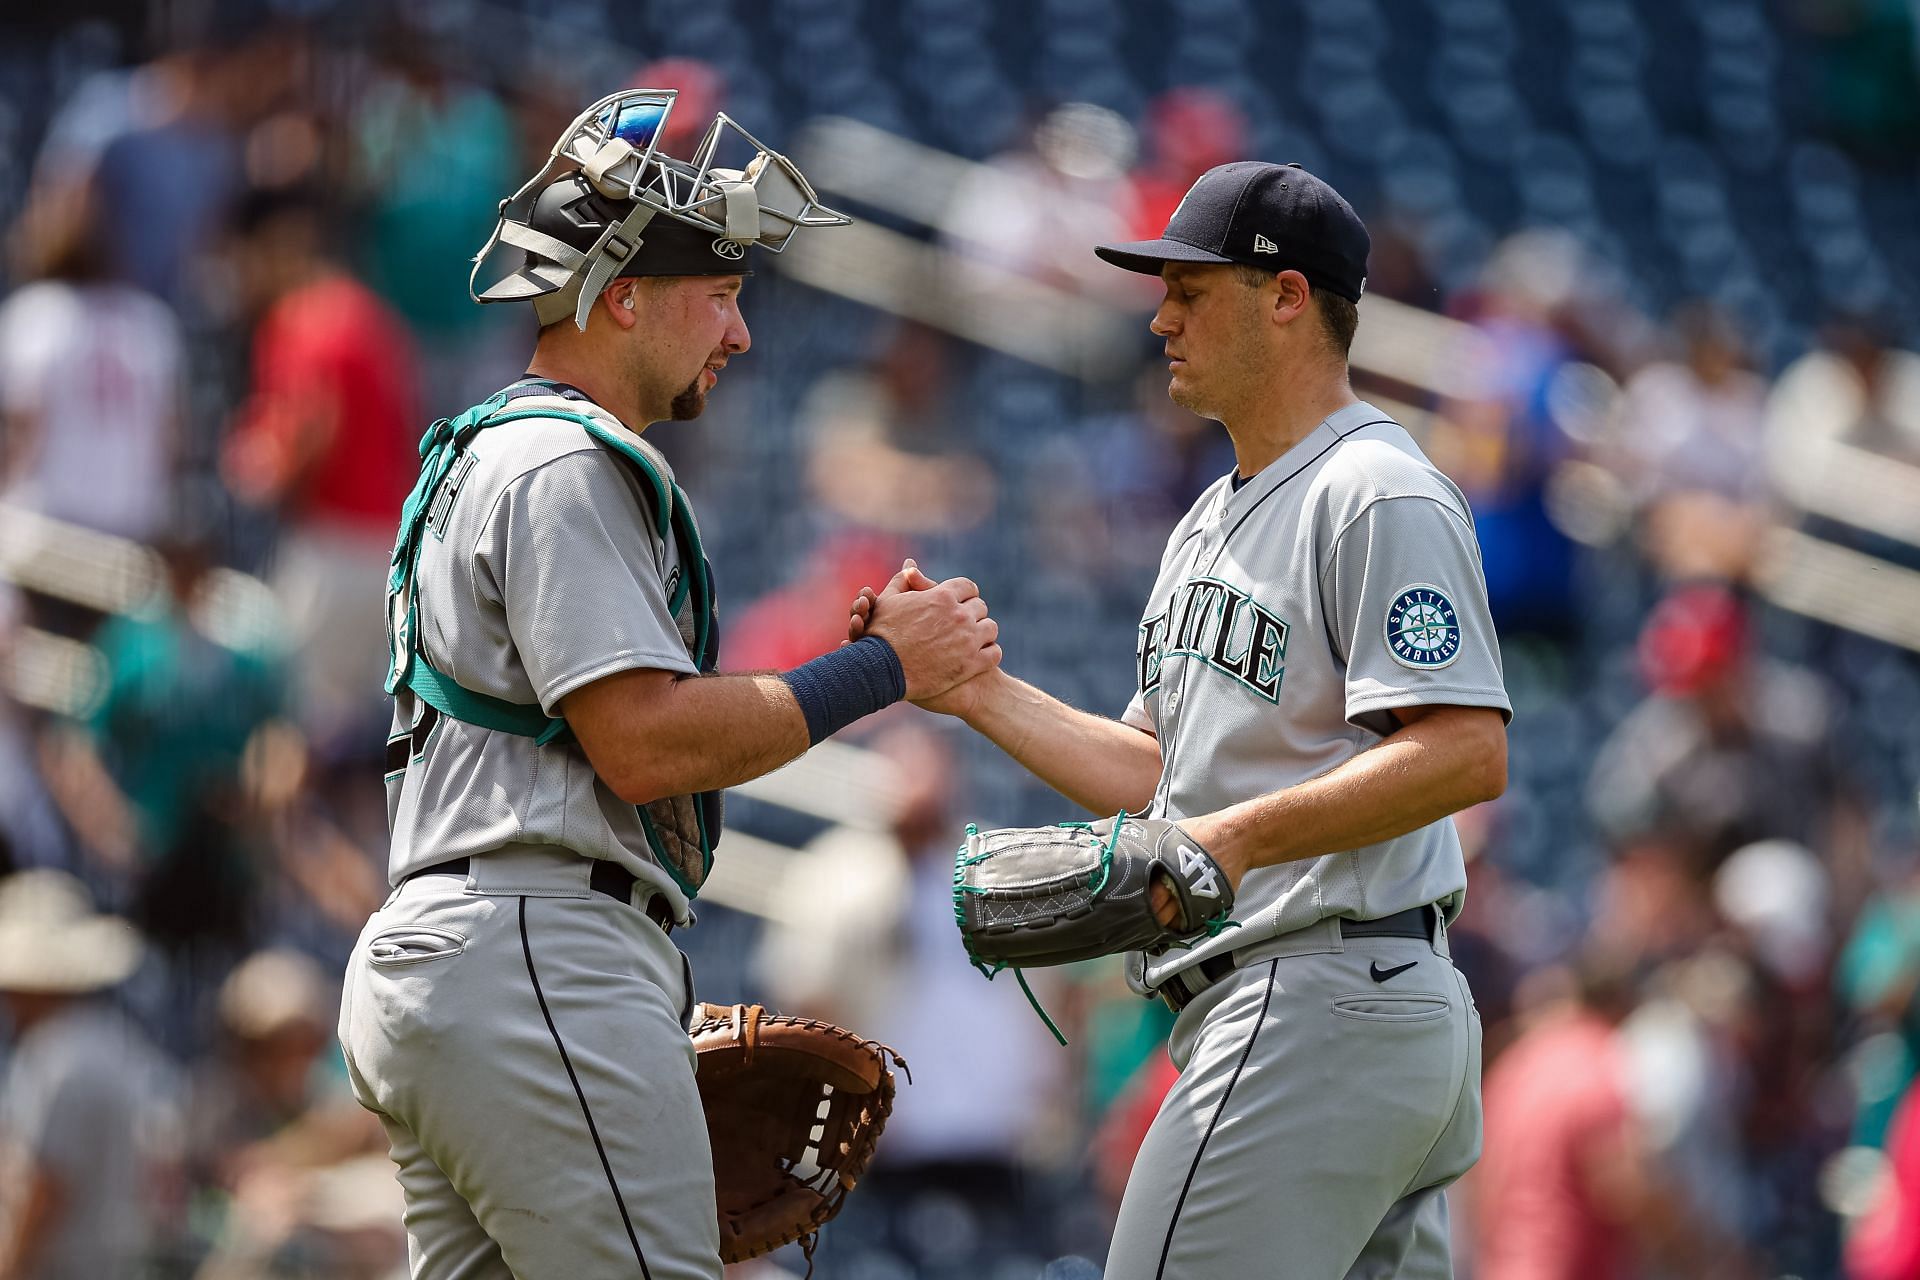 Mariners look past Giants to other orange team, lose 2-0 - Lookout Landing